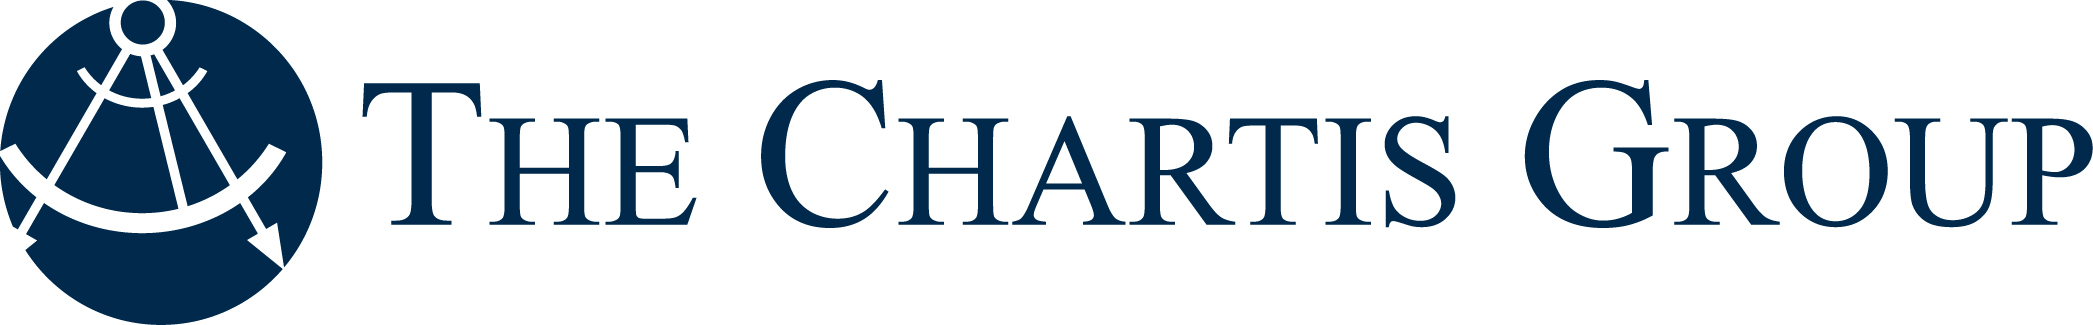 The Chartis Group Named One of the Top 20 “Best Places to Work in ...